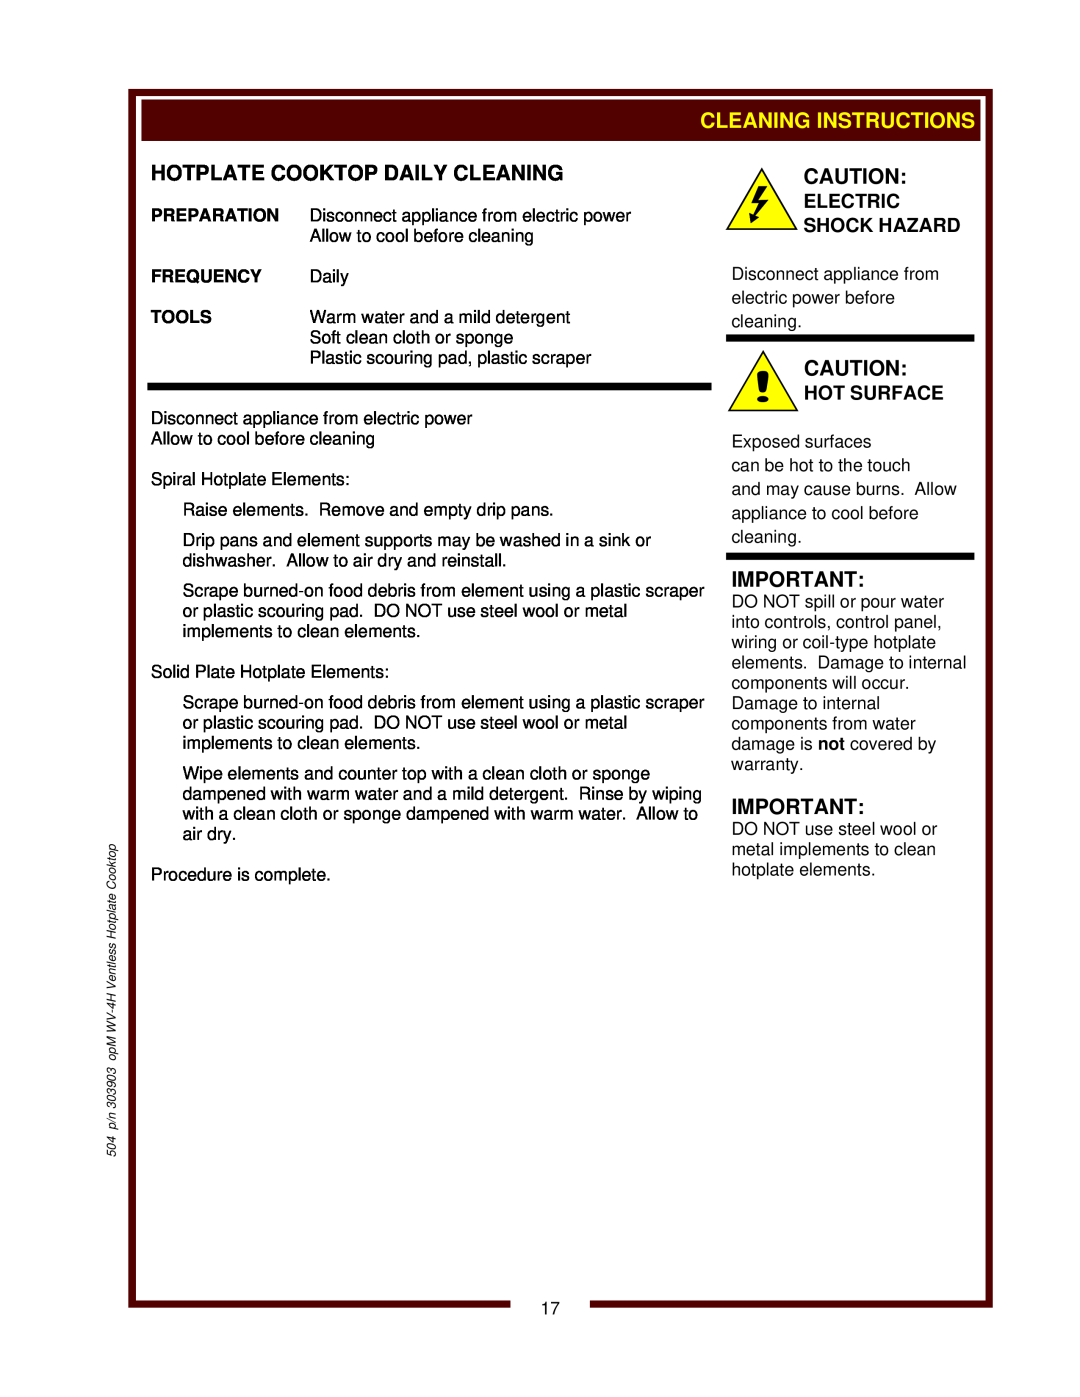 Wells WV-4HSRWT, WV-4HFRWT operation manual Cleaning Instructions, 504 p/n 303903 opM WV-4H Ventless Hotplate Cooktop 